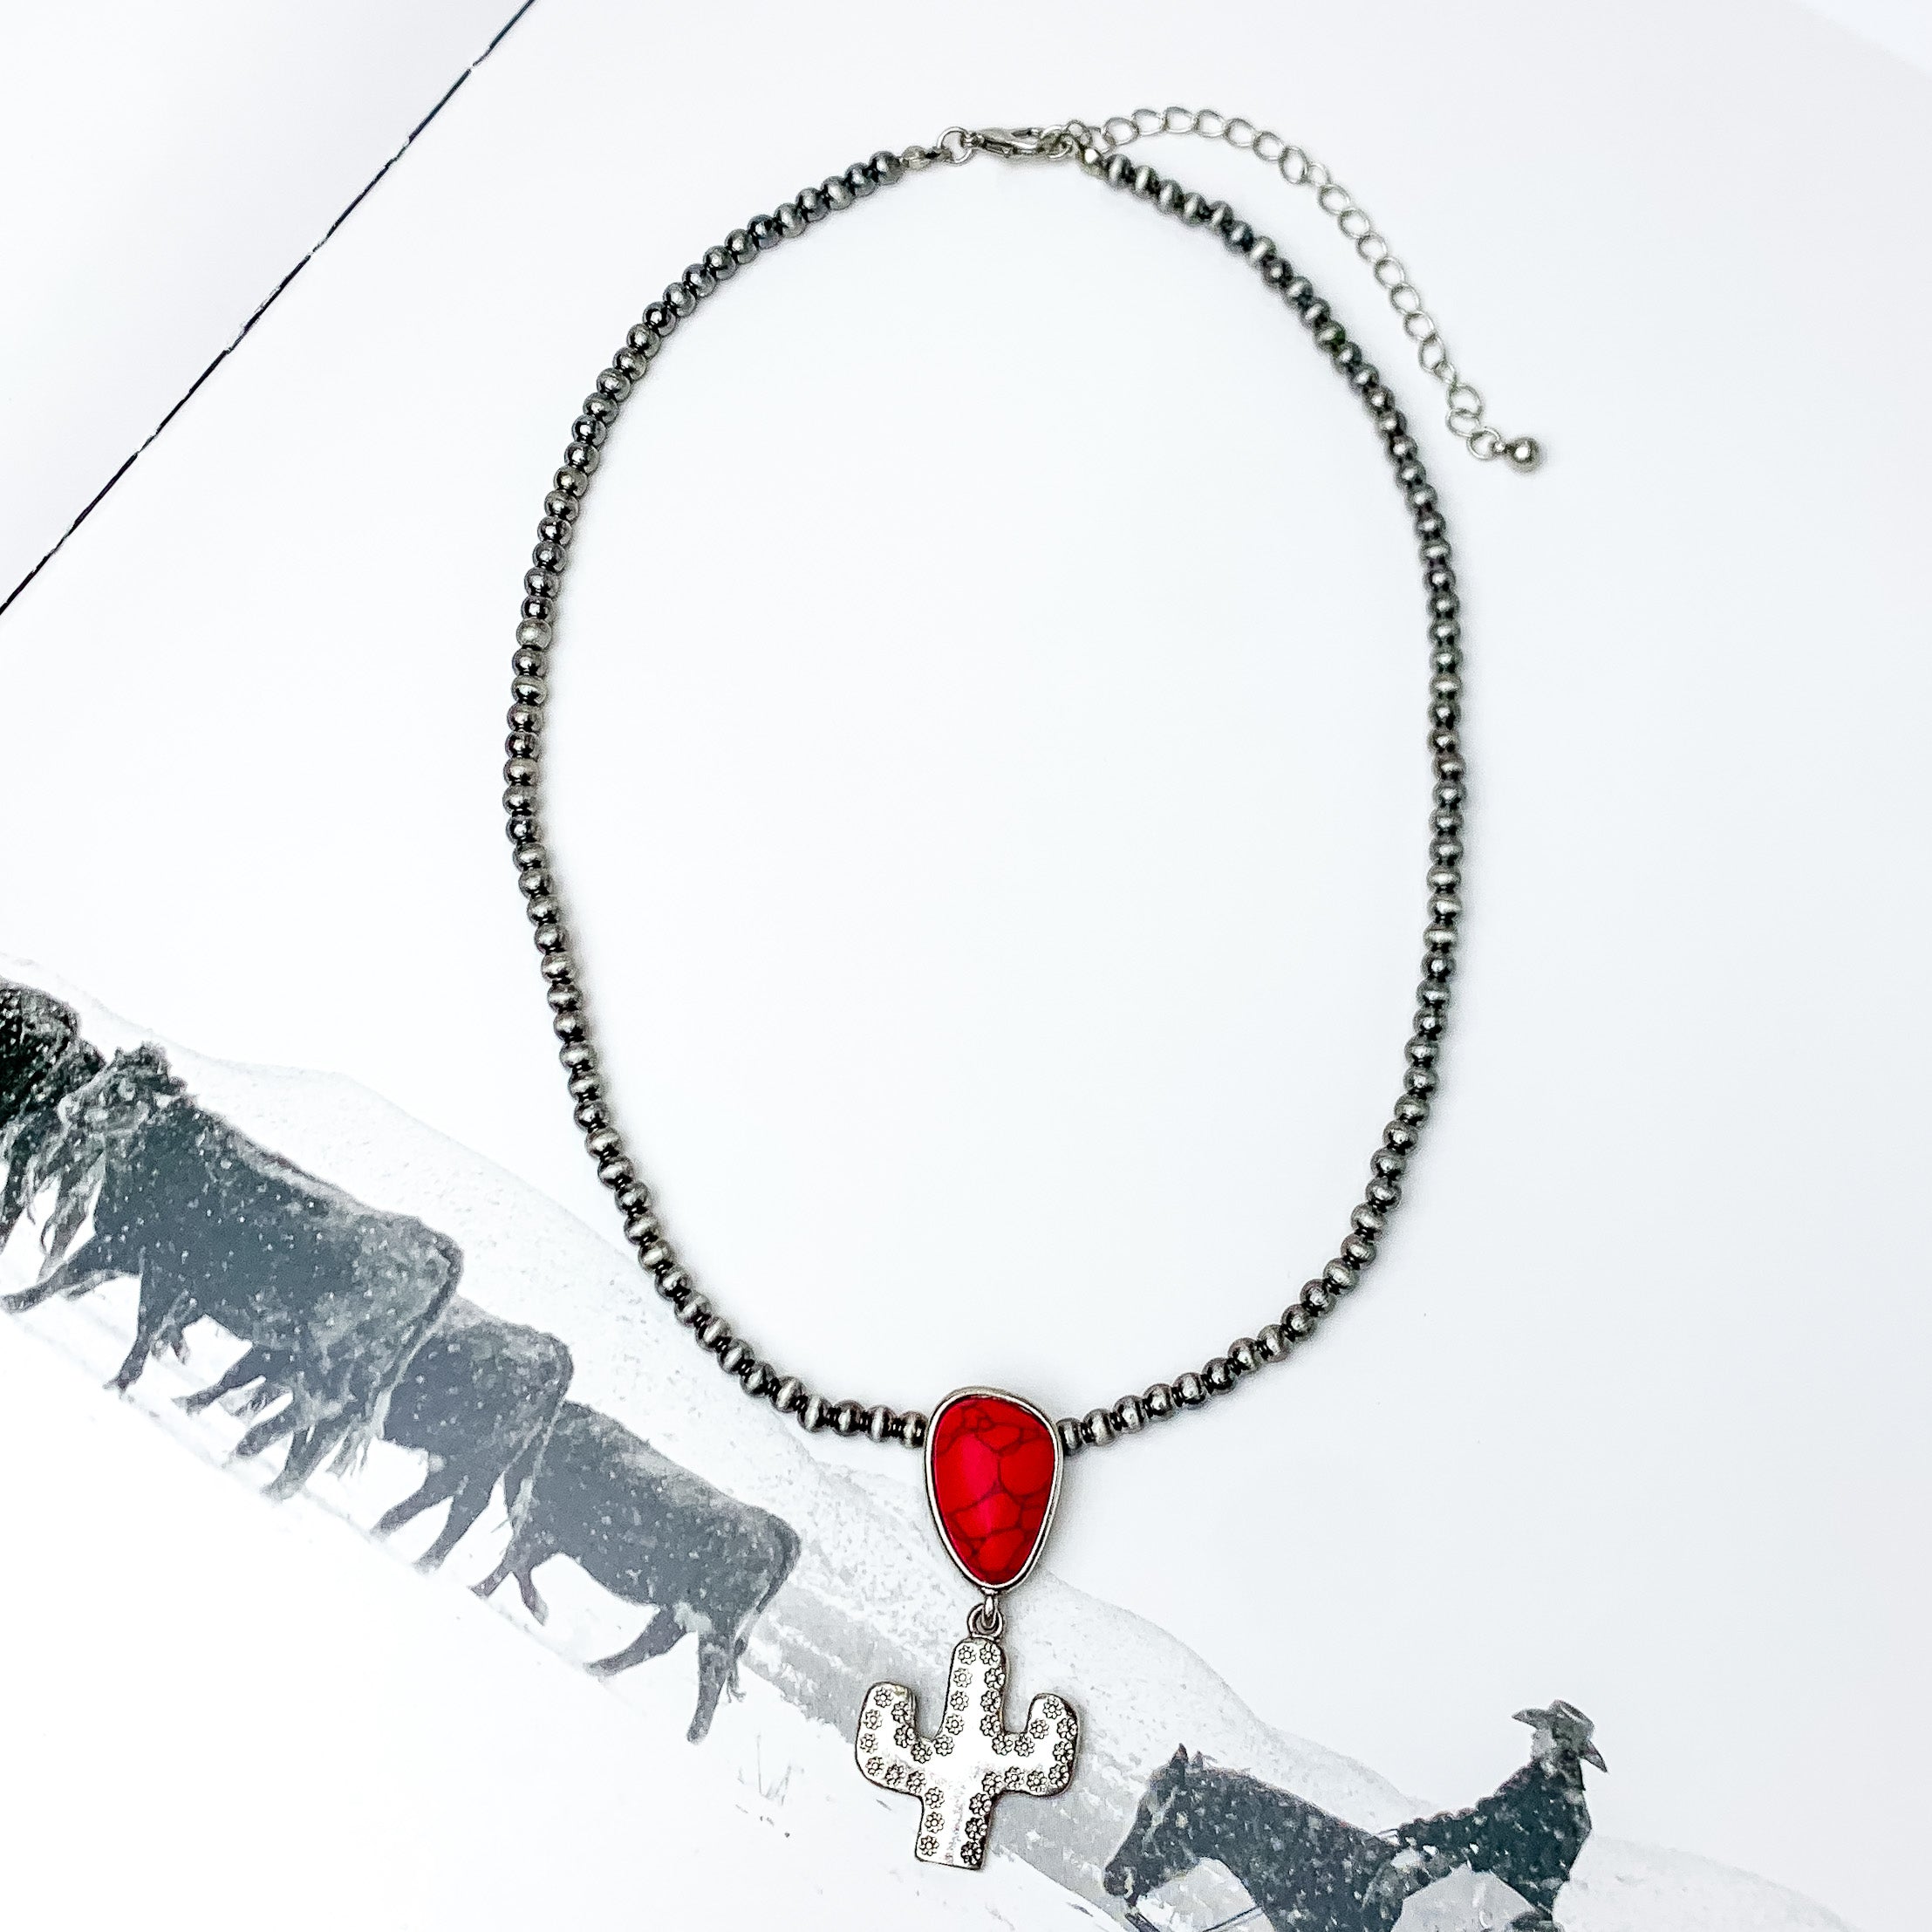 Cactus Queen Faux Navajo Silver Tone Necklace with Stone in Red. Pictured on a white background with a western scene on the background.